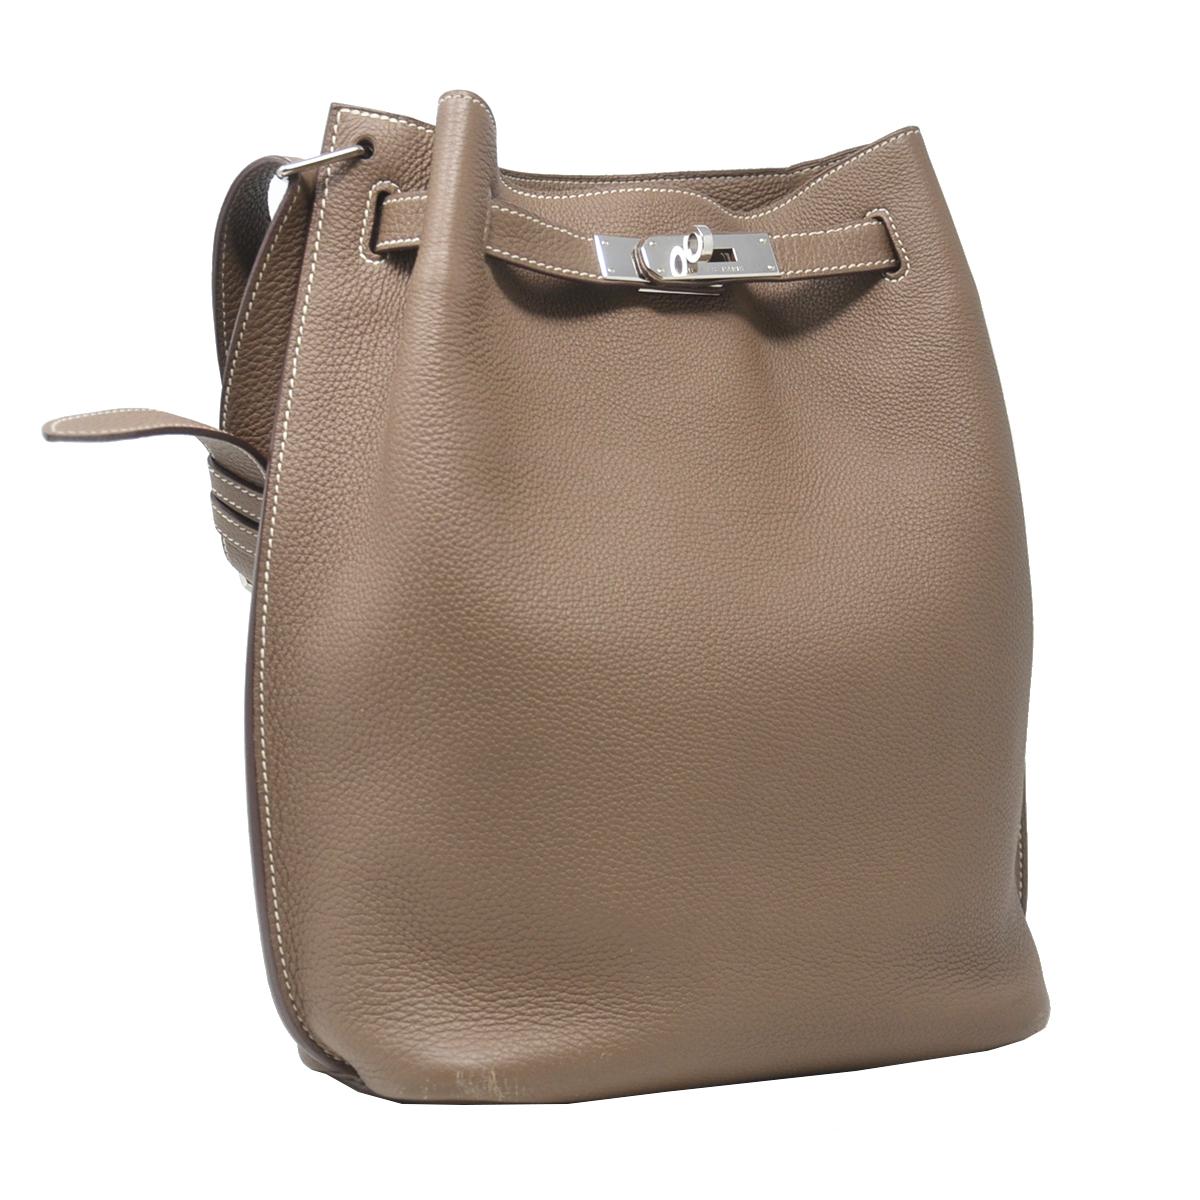 Company-HERMES
Model- Clemence So Kelly 22
Color-Taupe Grey
Style-Shoulder Bag
Material-Leather
Measurements-9.25